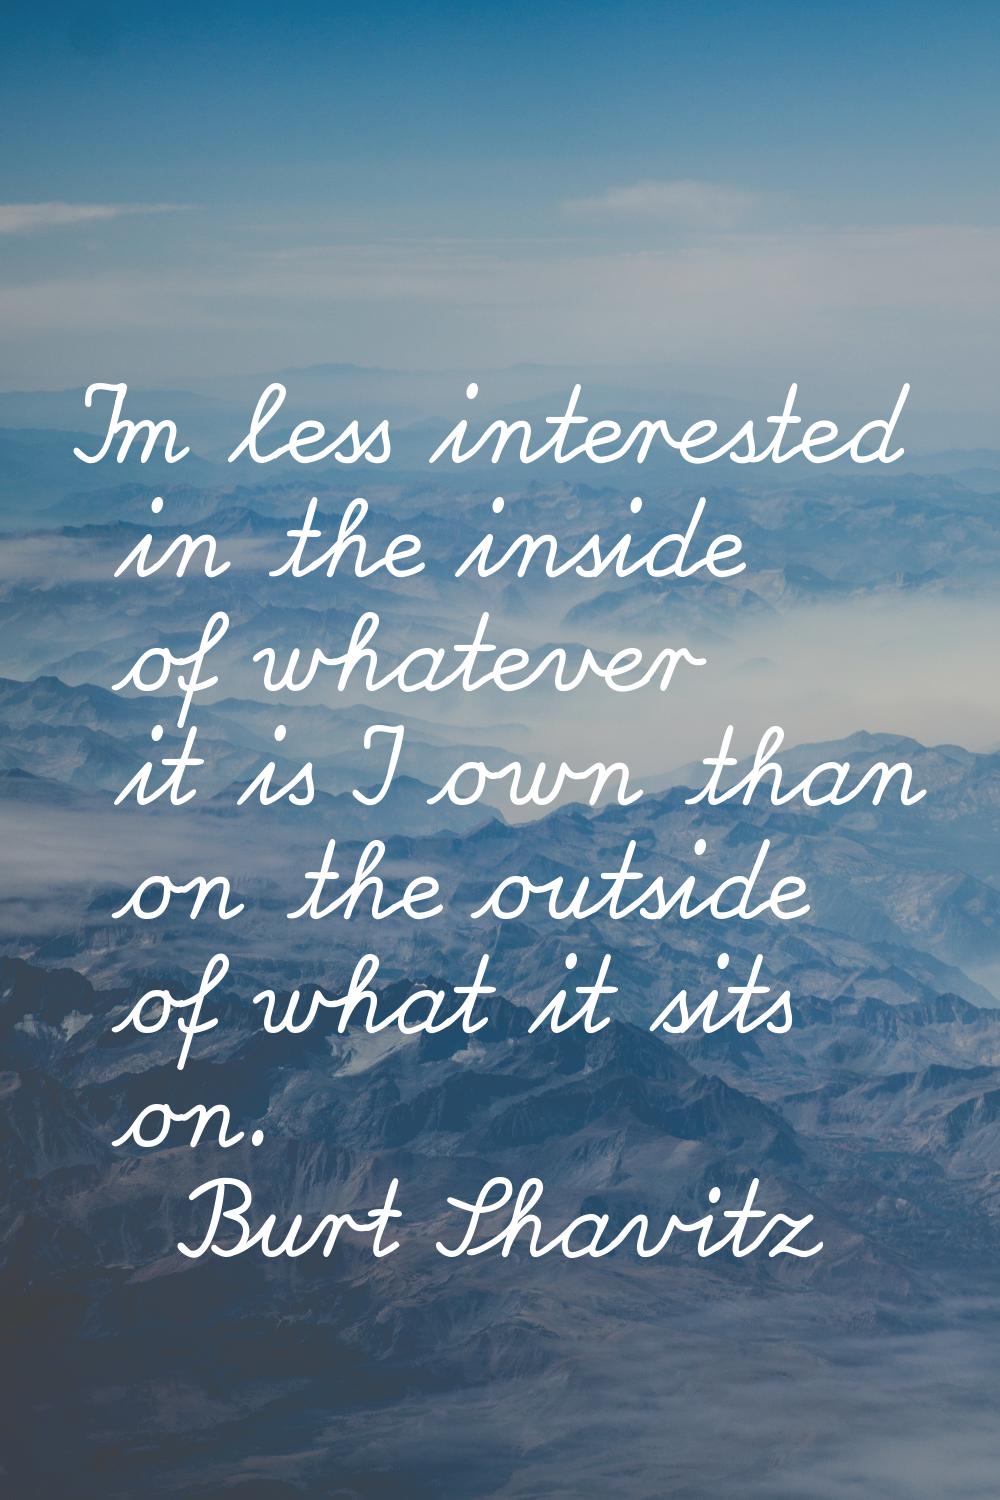 I'm less interested in the inside of whatever it is I own than on the outside of what it sits on.